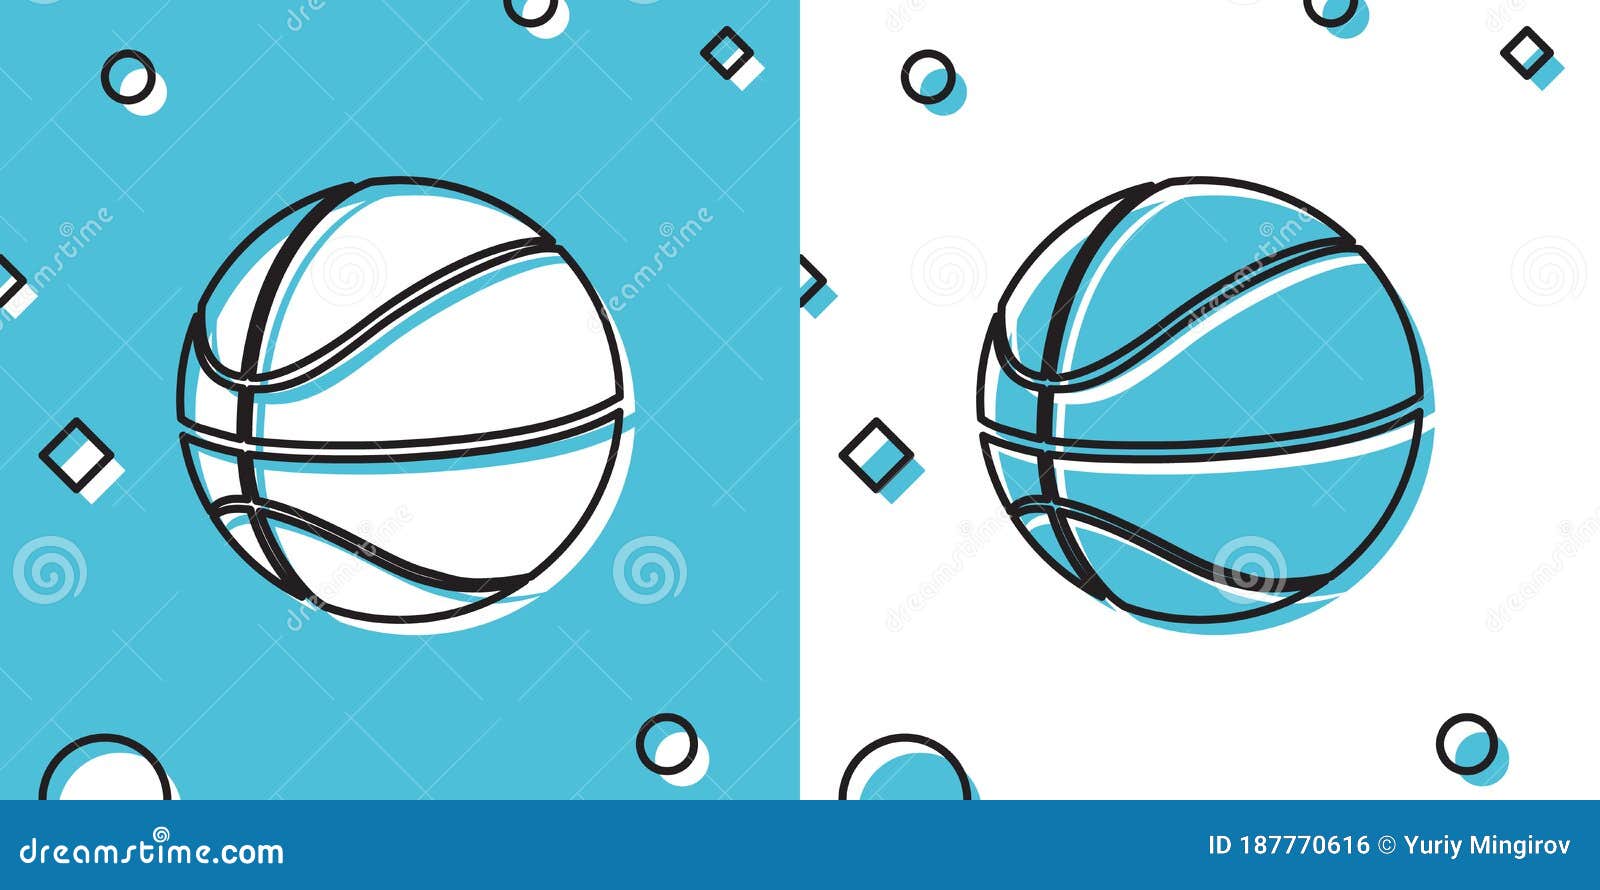 Black Basketball Ball Icon Isolated on Blue and White Background. Sport  Symbol. Random Dynamic Shapes Stock Vector - Illustration of basket,  object: 187770616